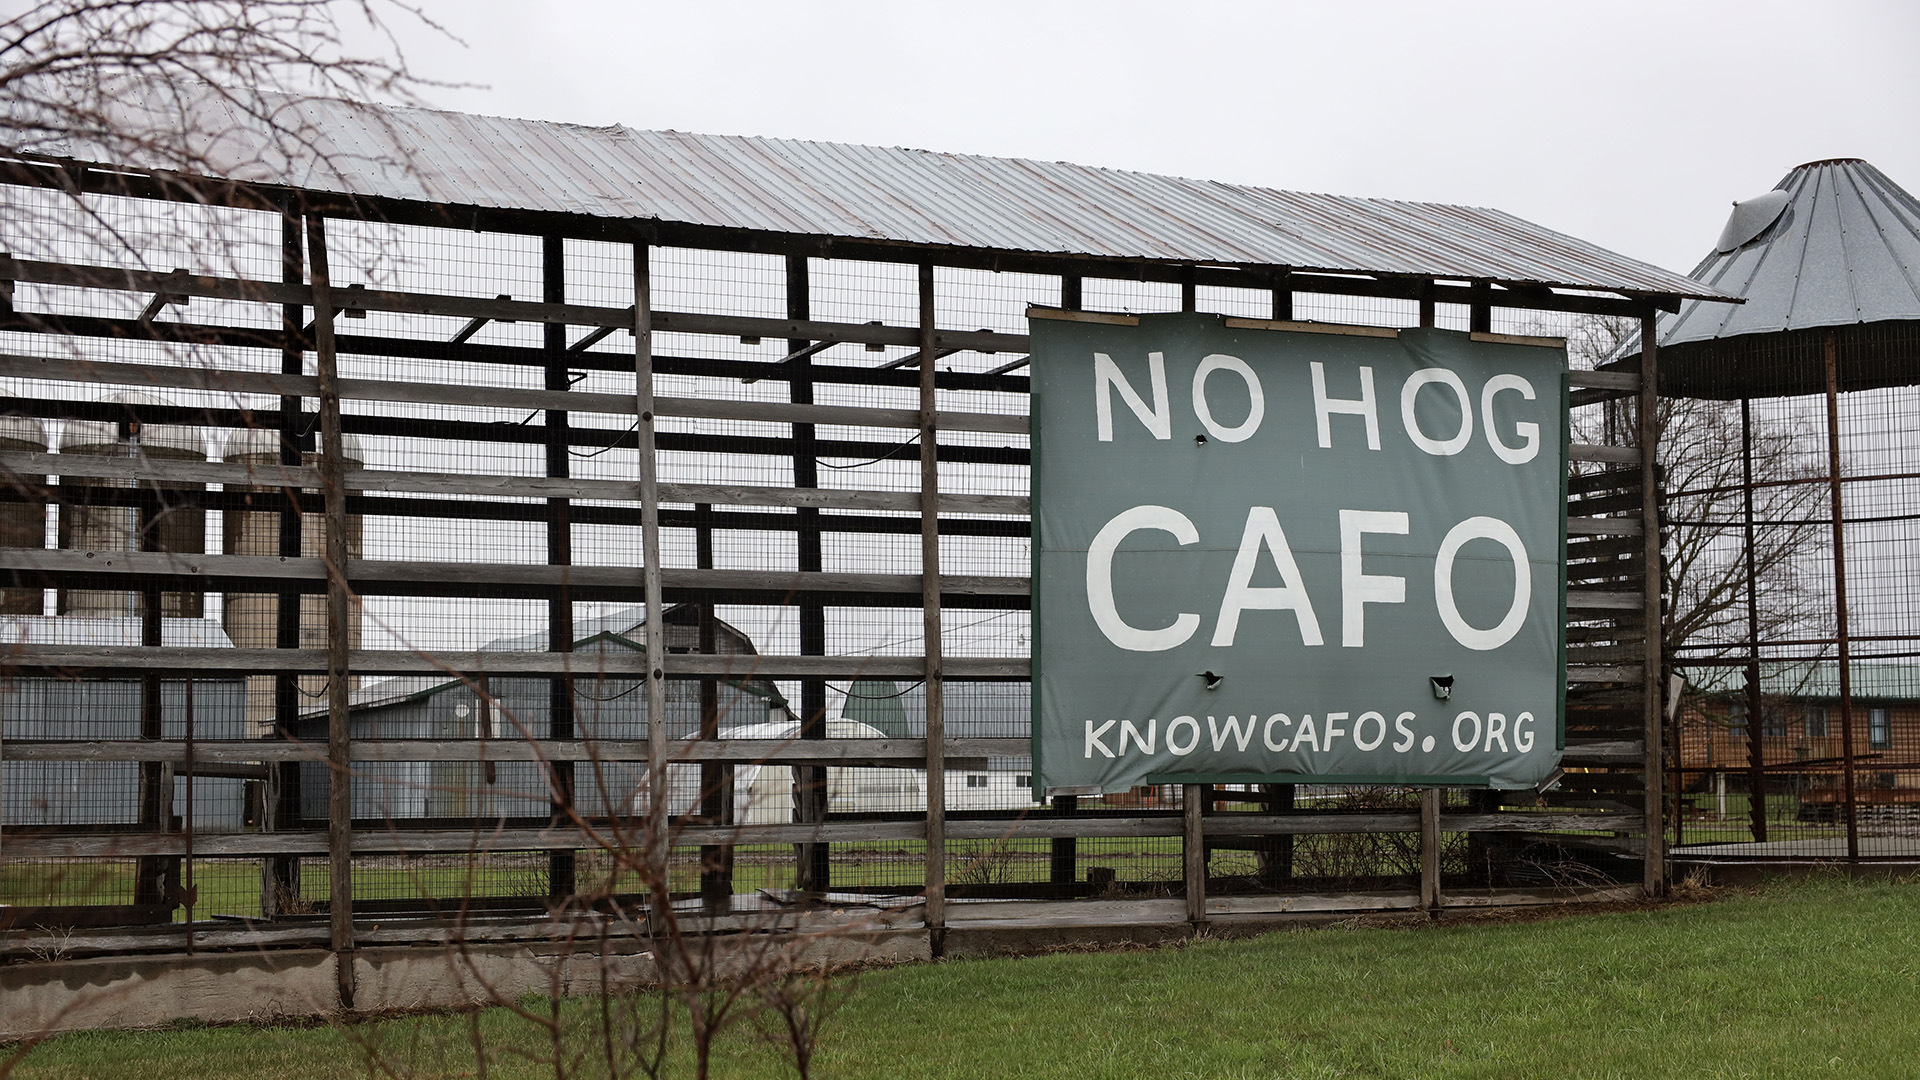 A large fabric sign with the words "No Hog CAFO" and URL "knowcafors.org" is attached to the side of an open-walled barn with wood framing and metal wire walls, standing next to a similarly constructed silo and with more farm buildings and silos in the background.